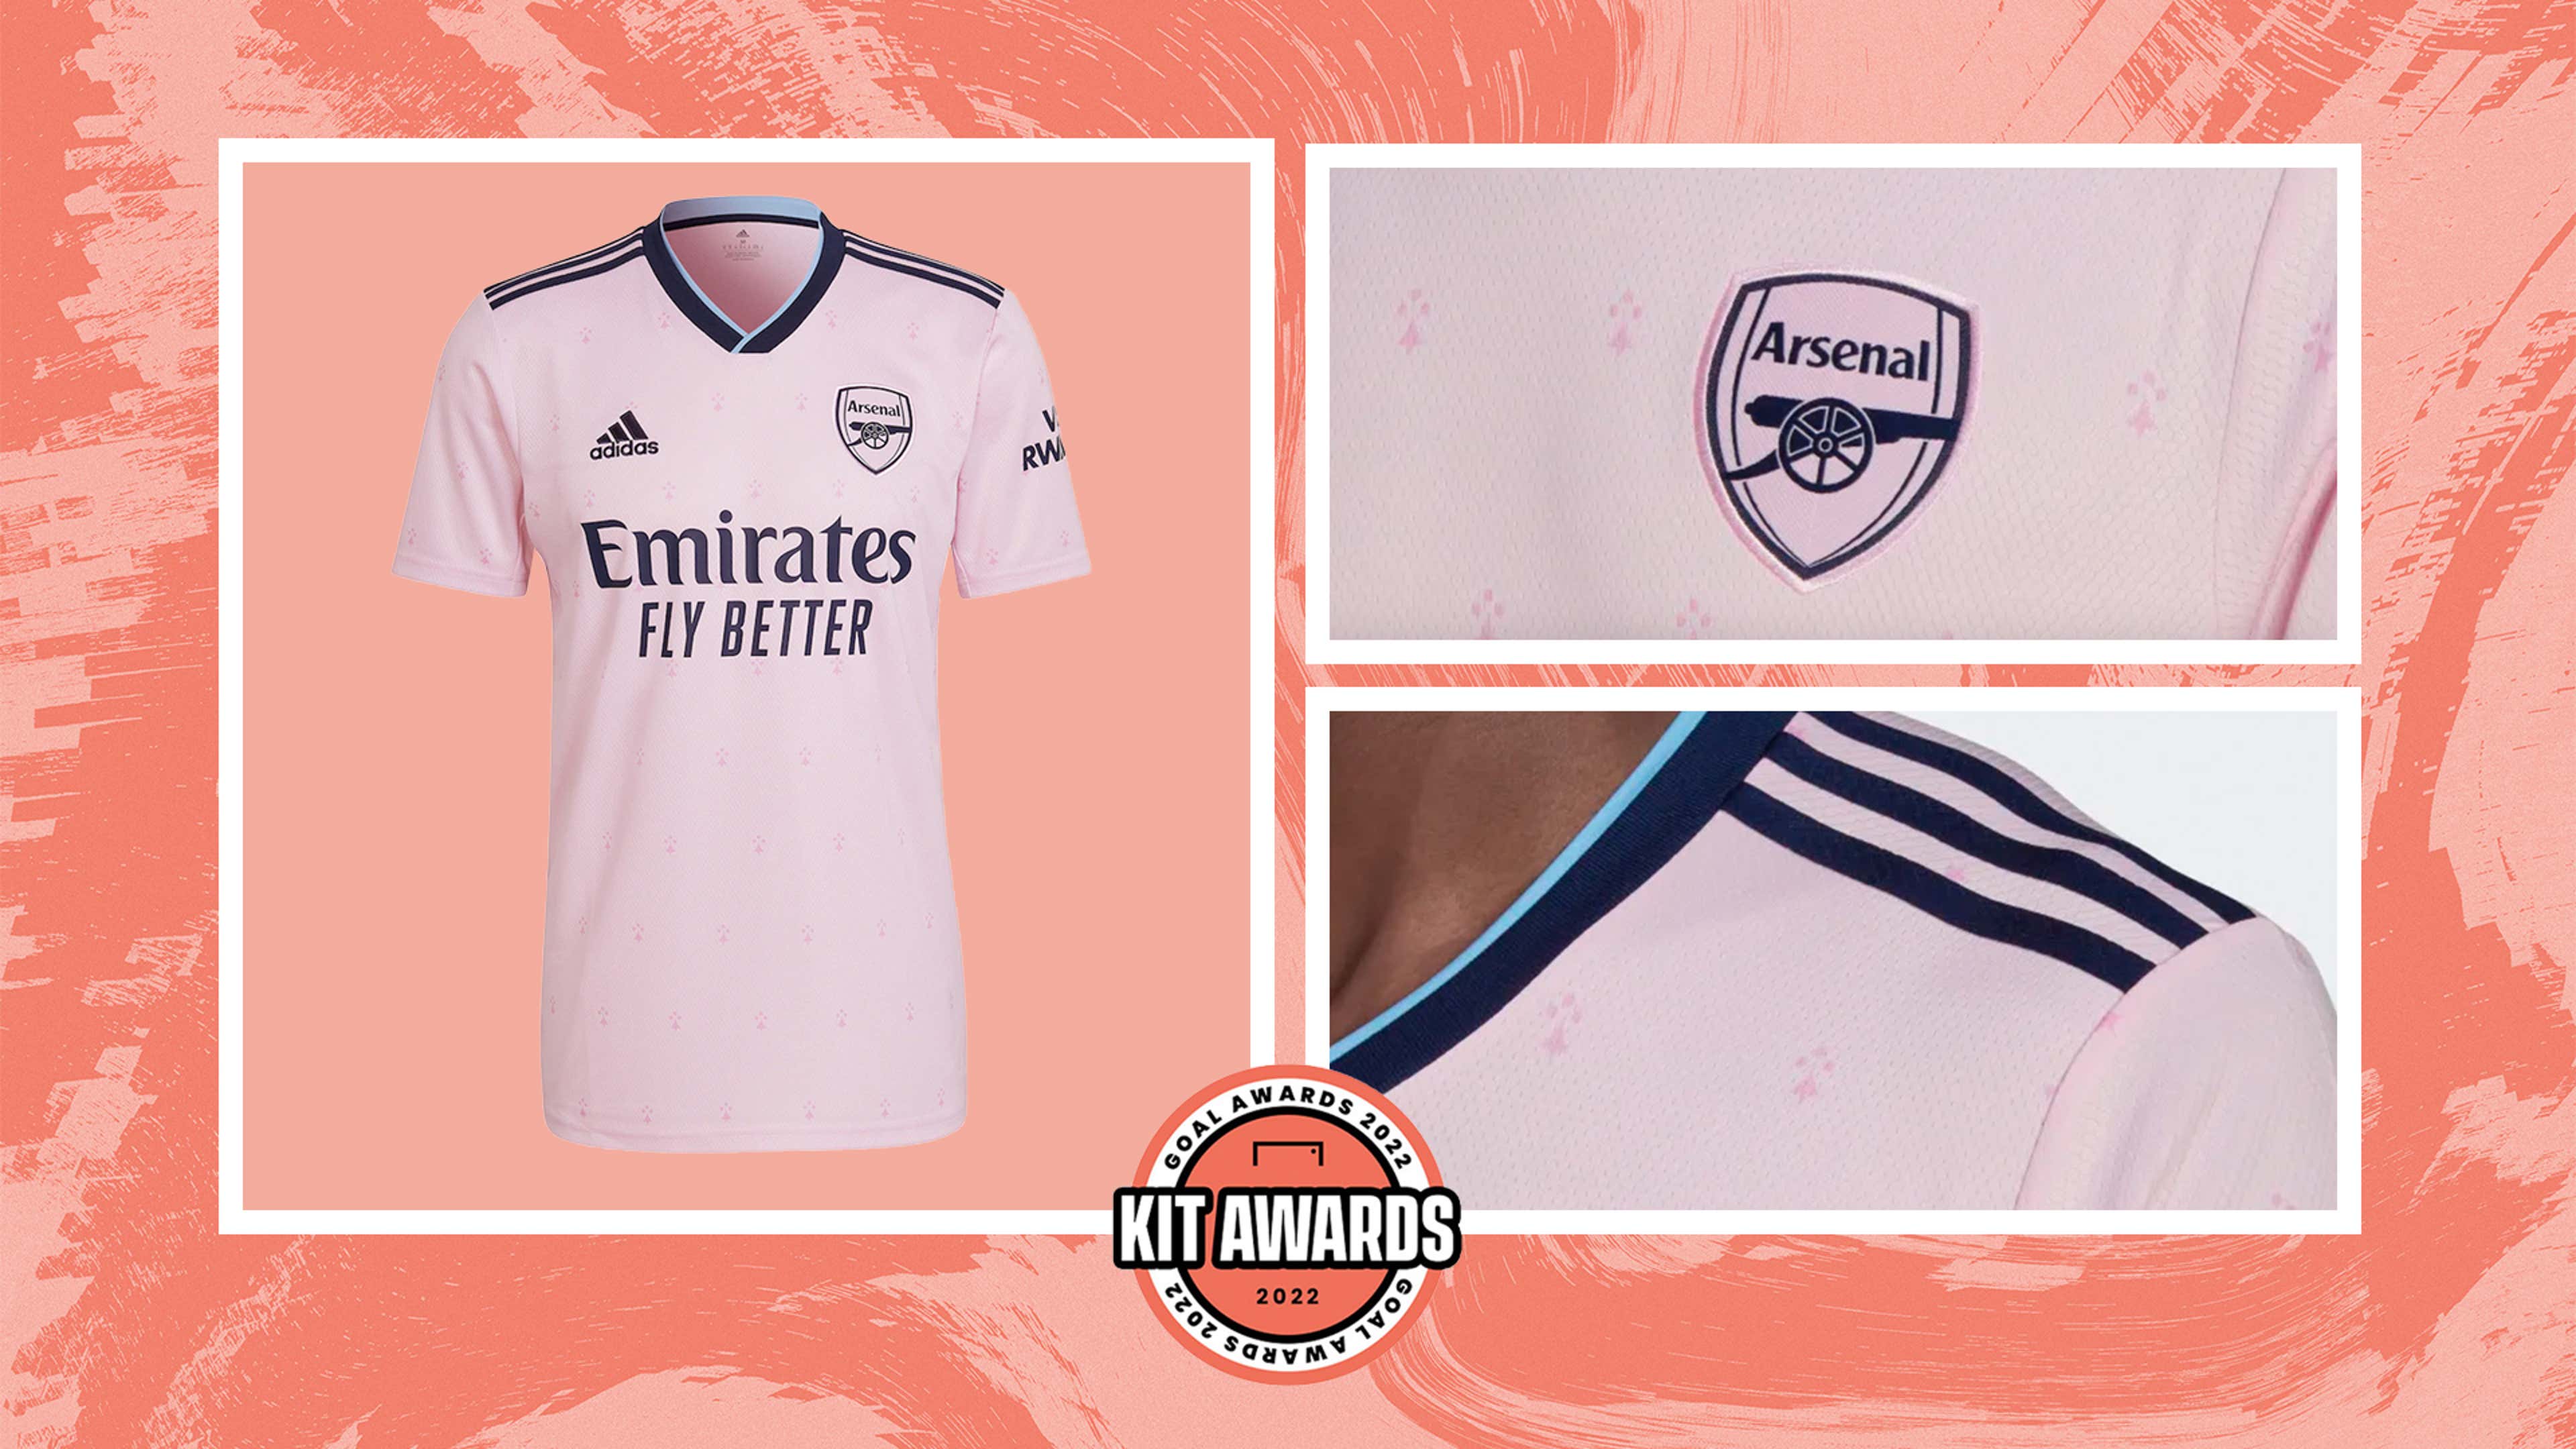 Football's Most Iconic Pink Kits – Ranked